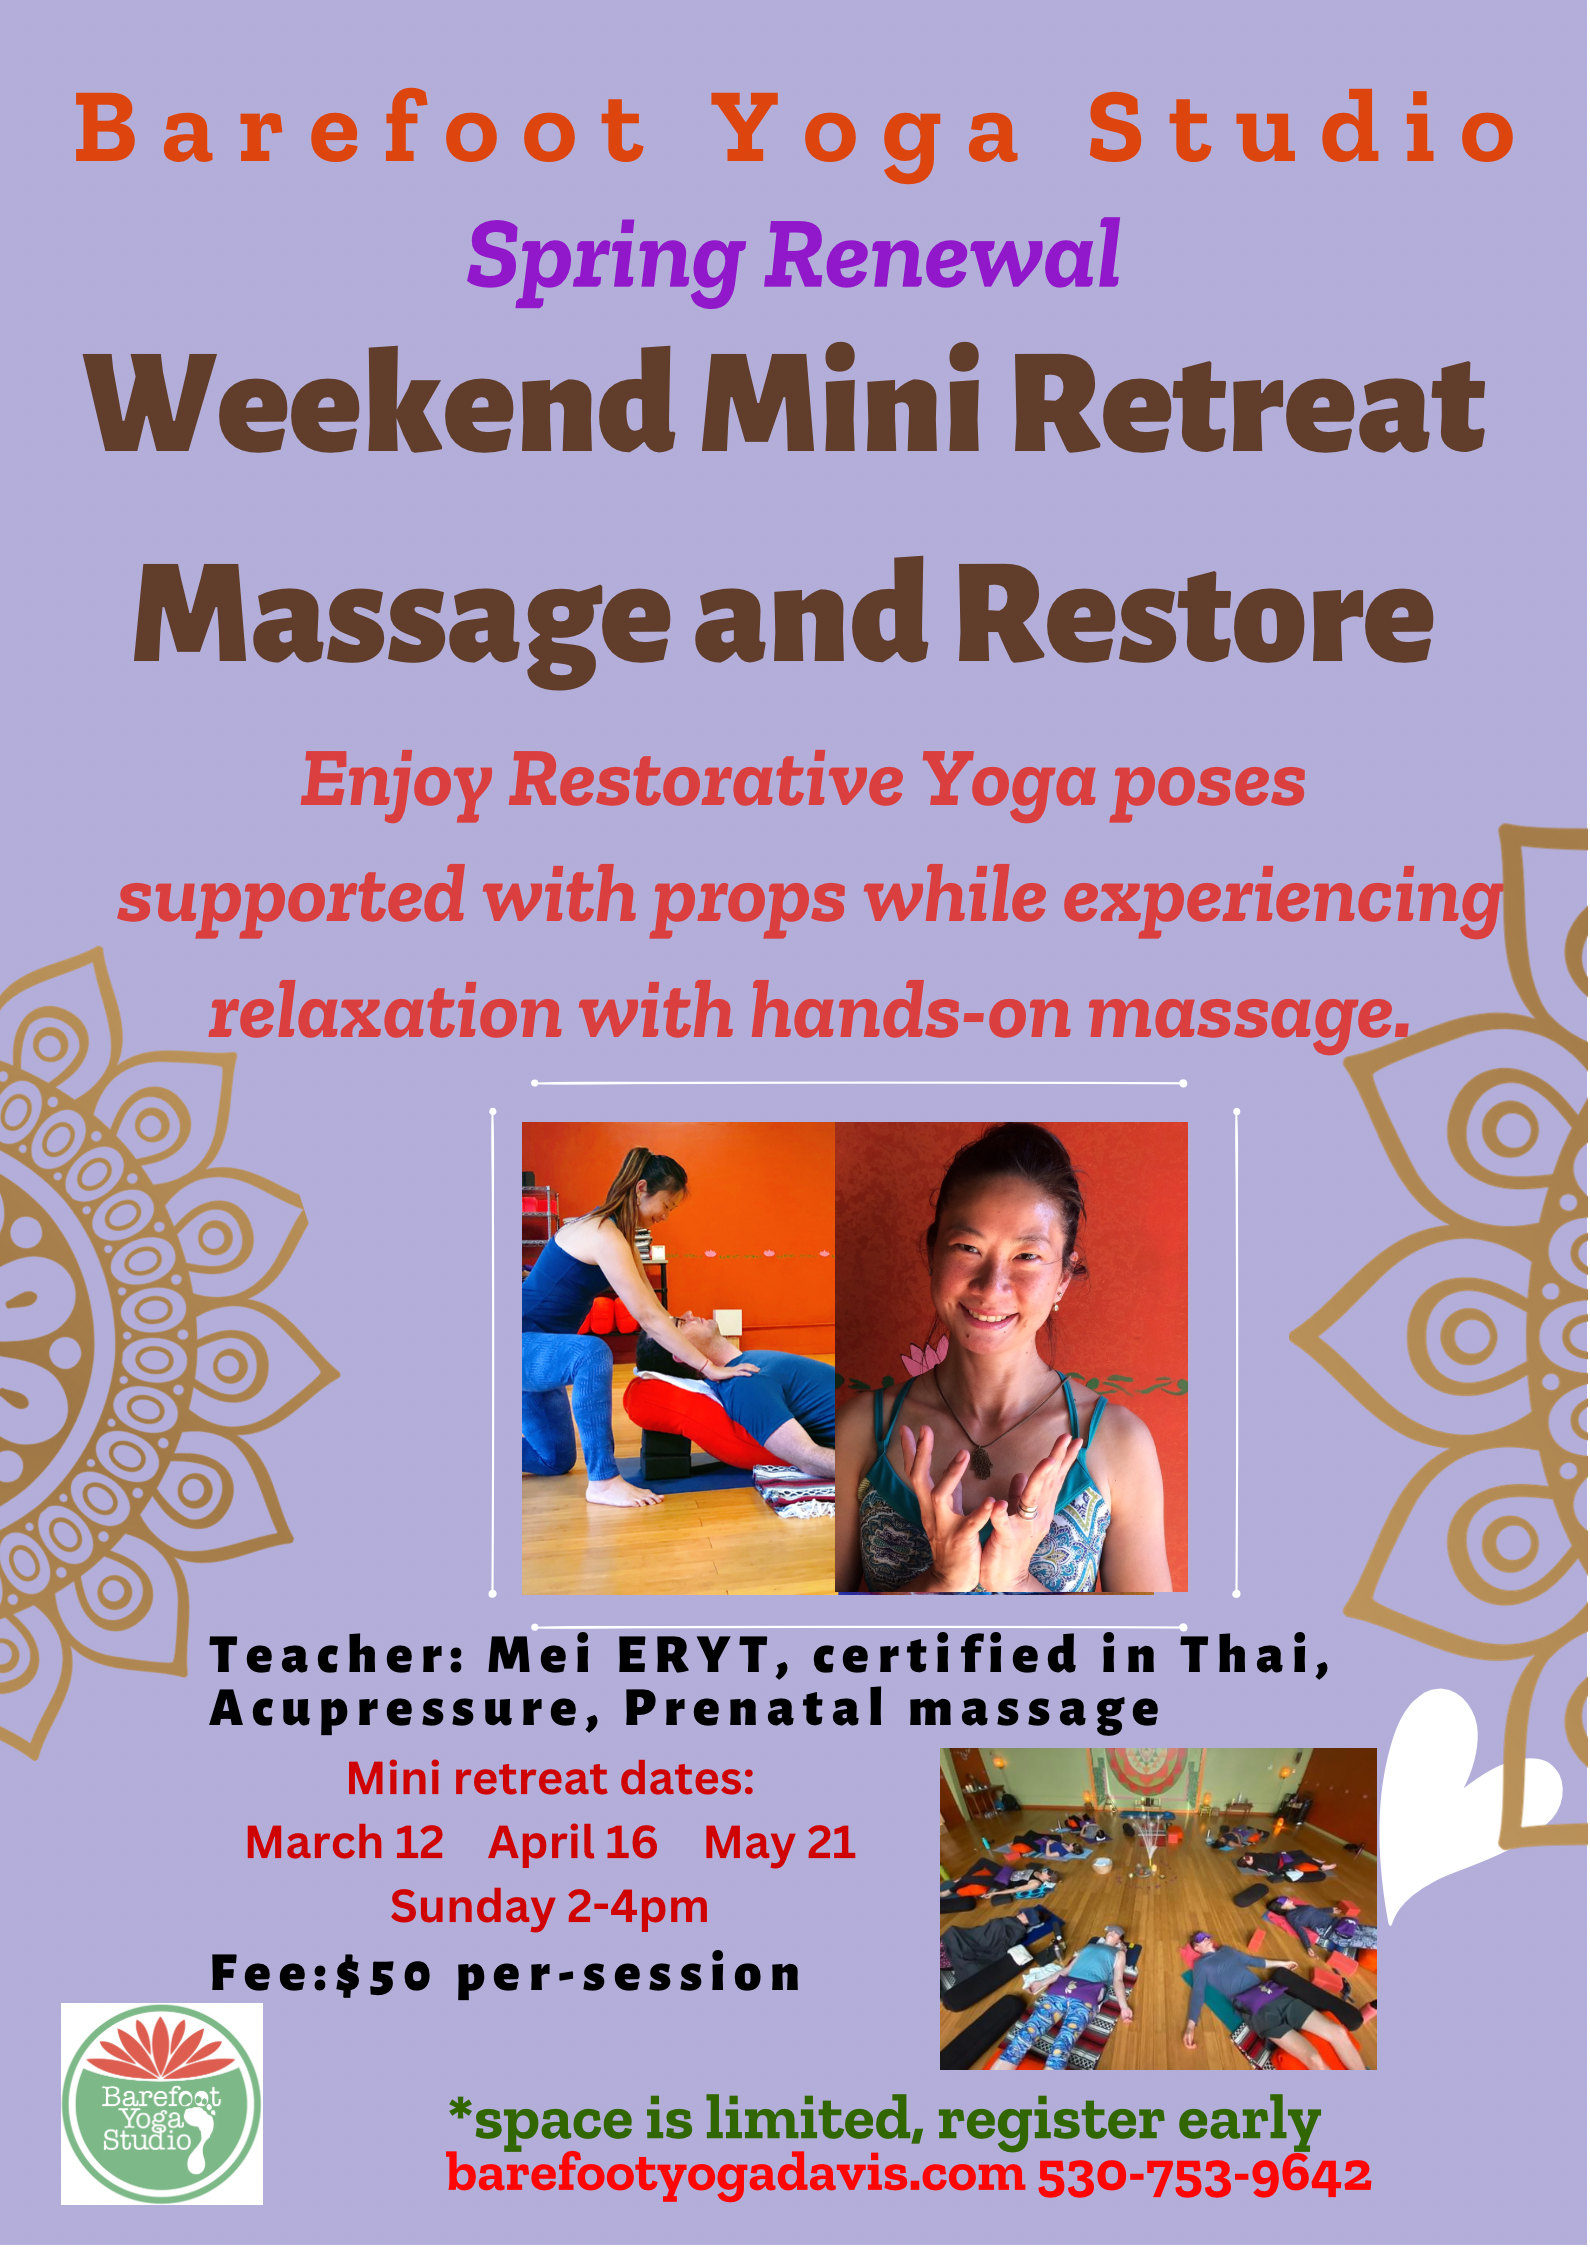 Spring Renewal Mini Retreat to Restore and Relax